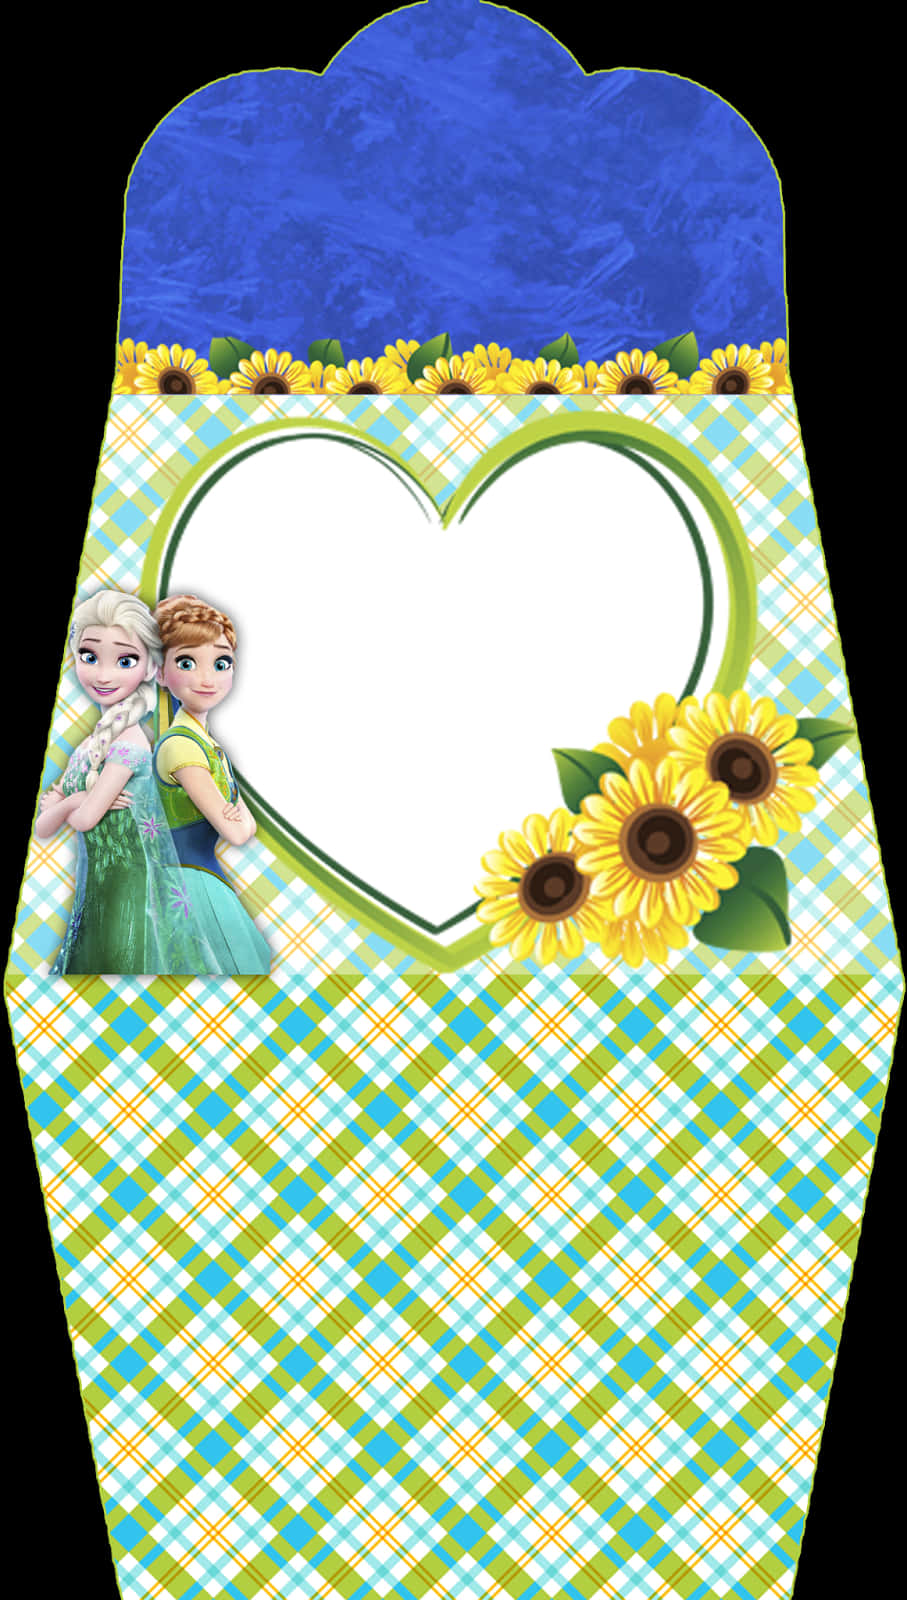 A Cartoon Of Two Women And A Heart With Sunflowers